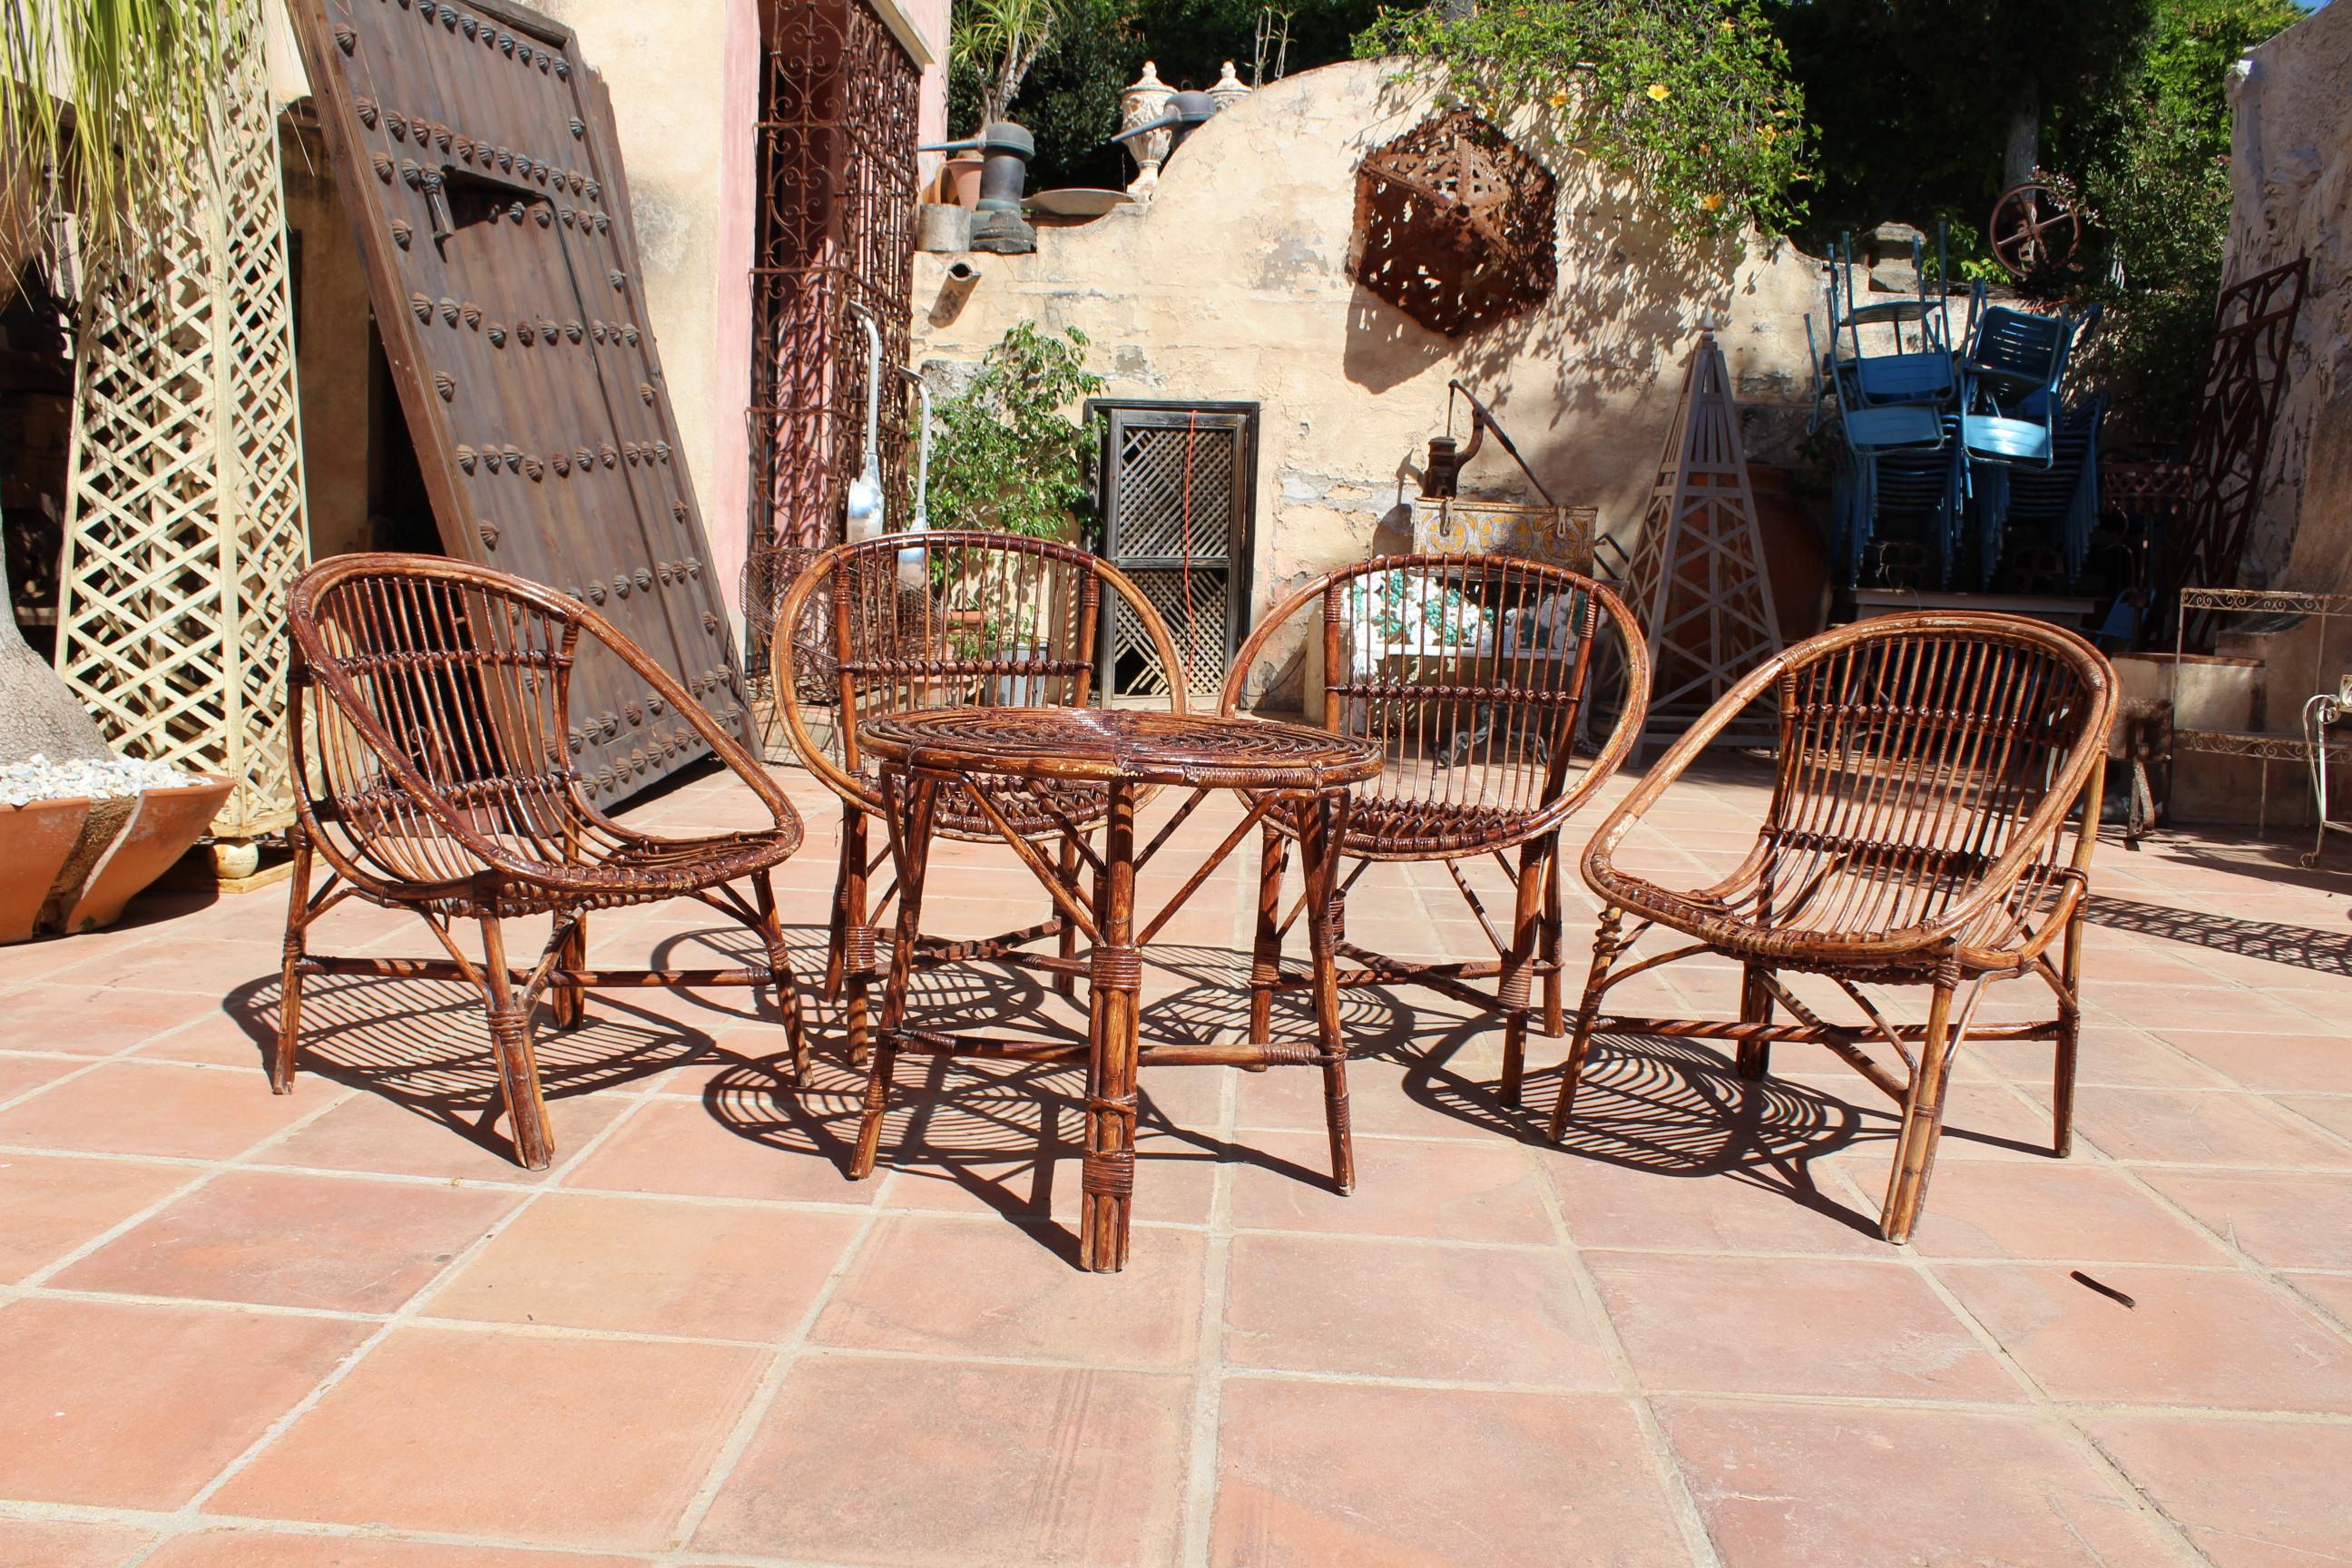 1970s bamboo set of four chairs and table. 

Measures: Table: 56 x 63 cm
Chairs: 76 x 59 x 70 cm
Armchairs: 80 x 66 x 50 cm.